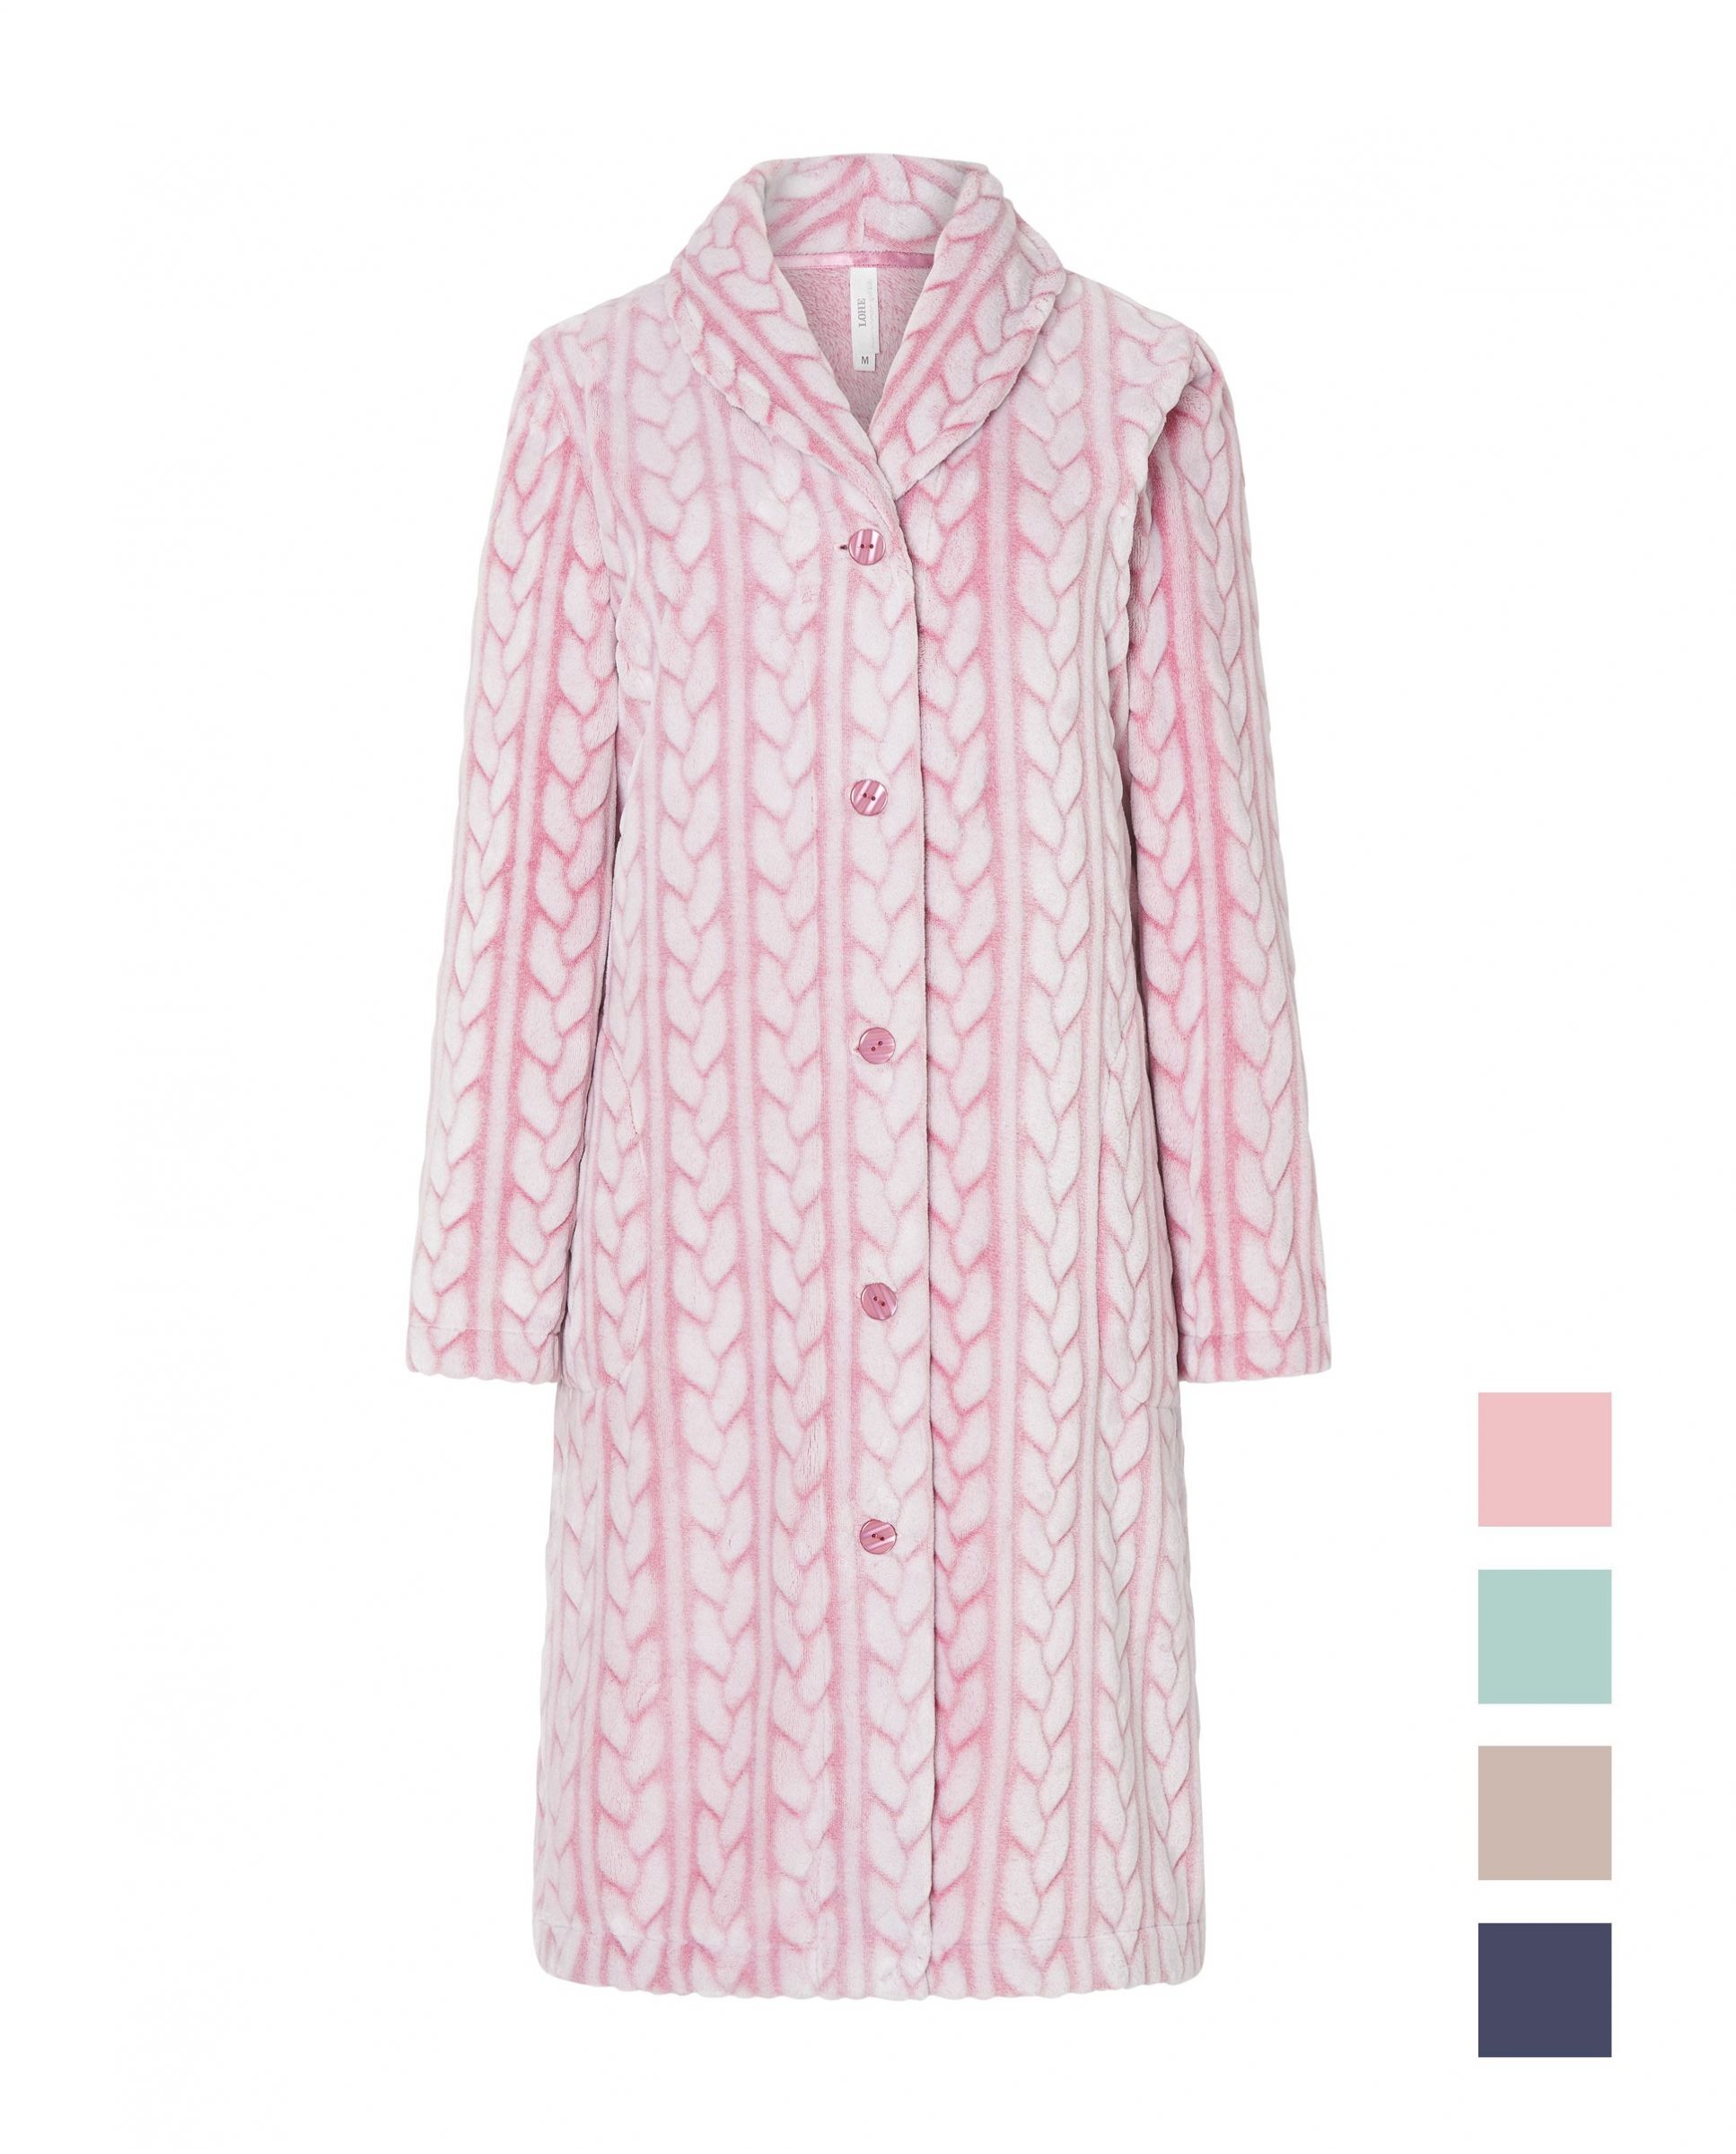 Women's winter long open buttoned coat in pink plaited jaquard fabric with side pockets.